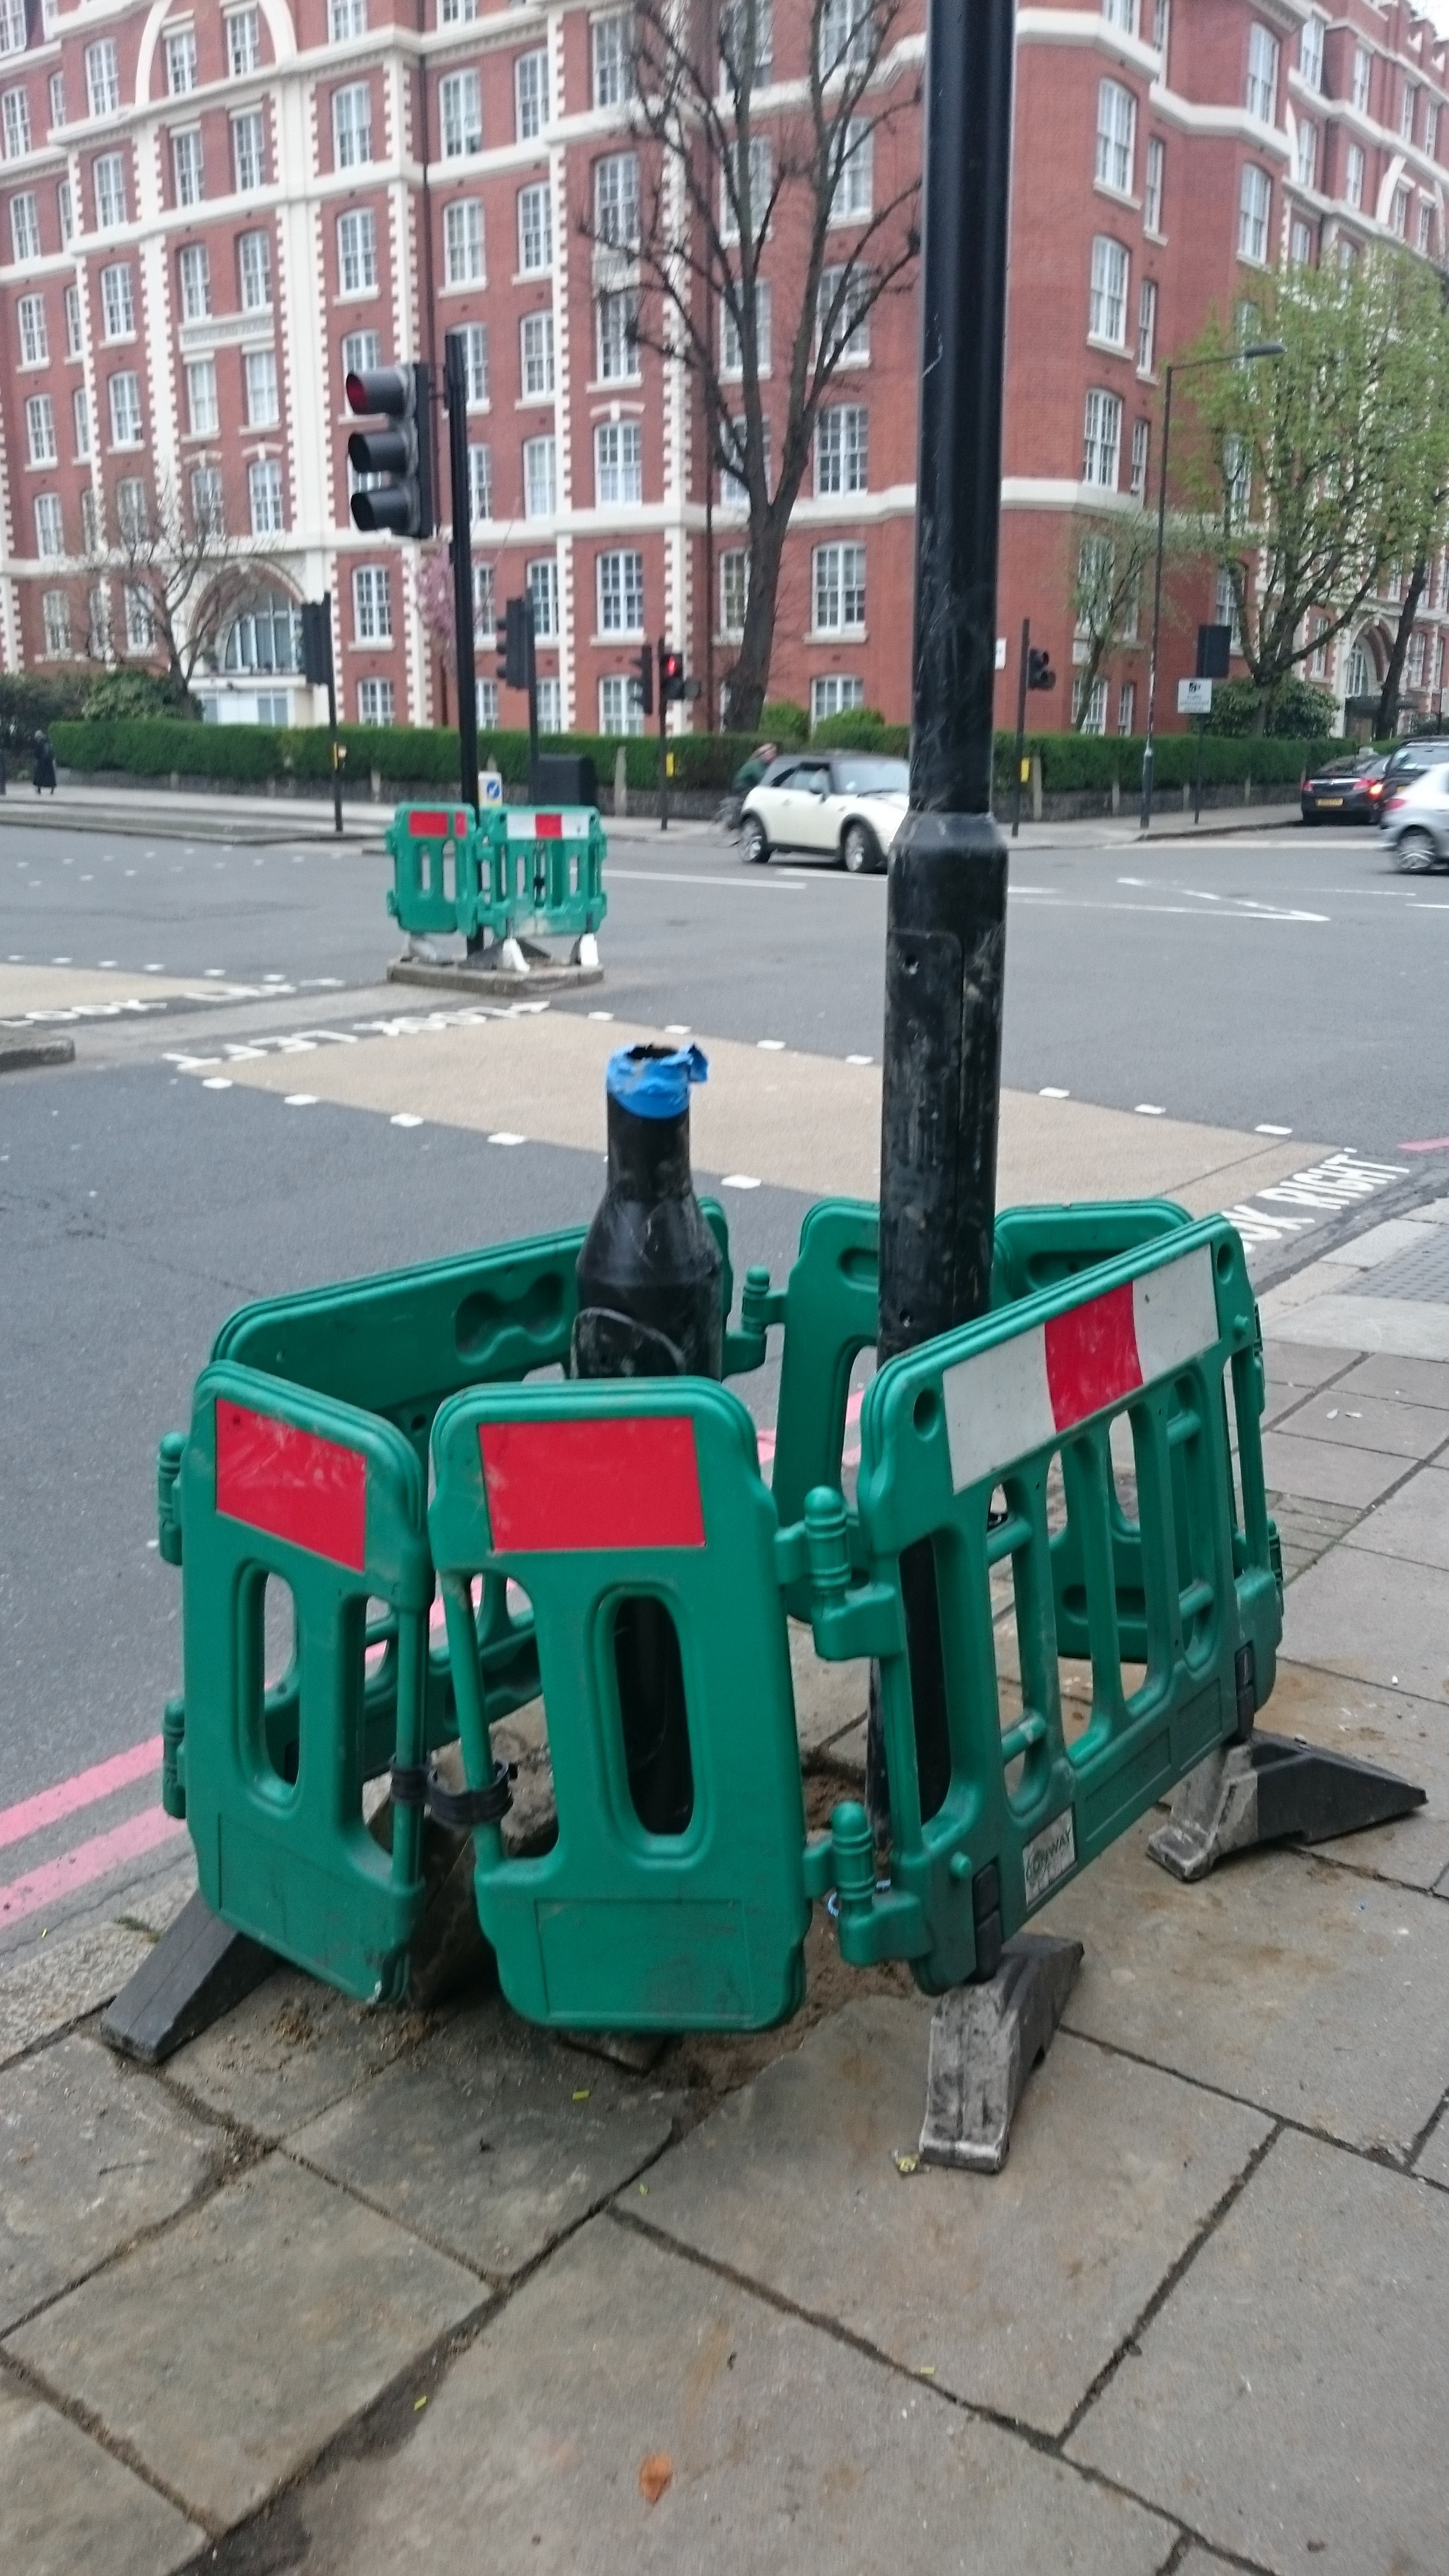 Removing unnecessary street furniture | City of Westminster